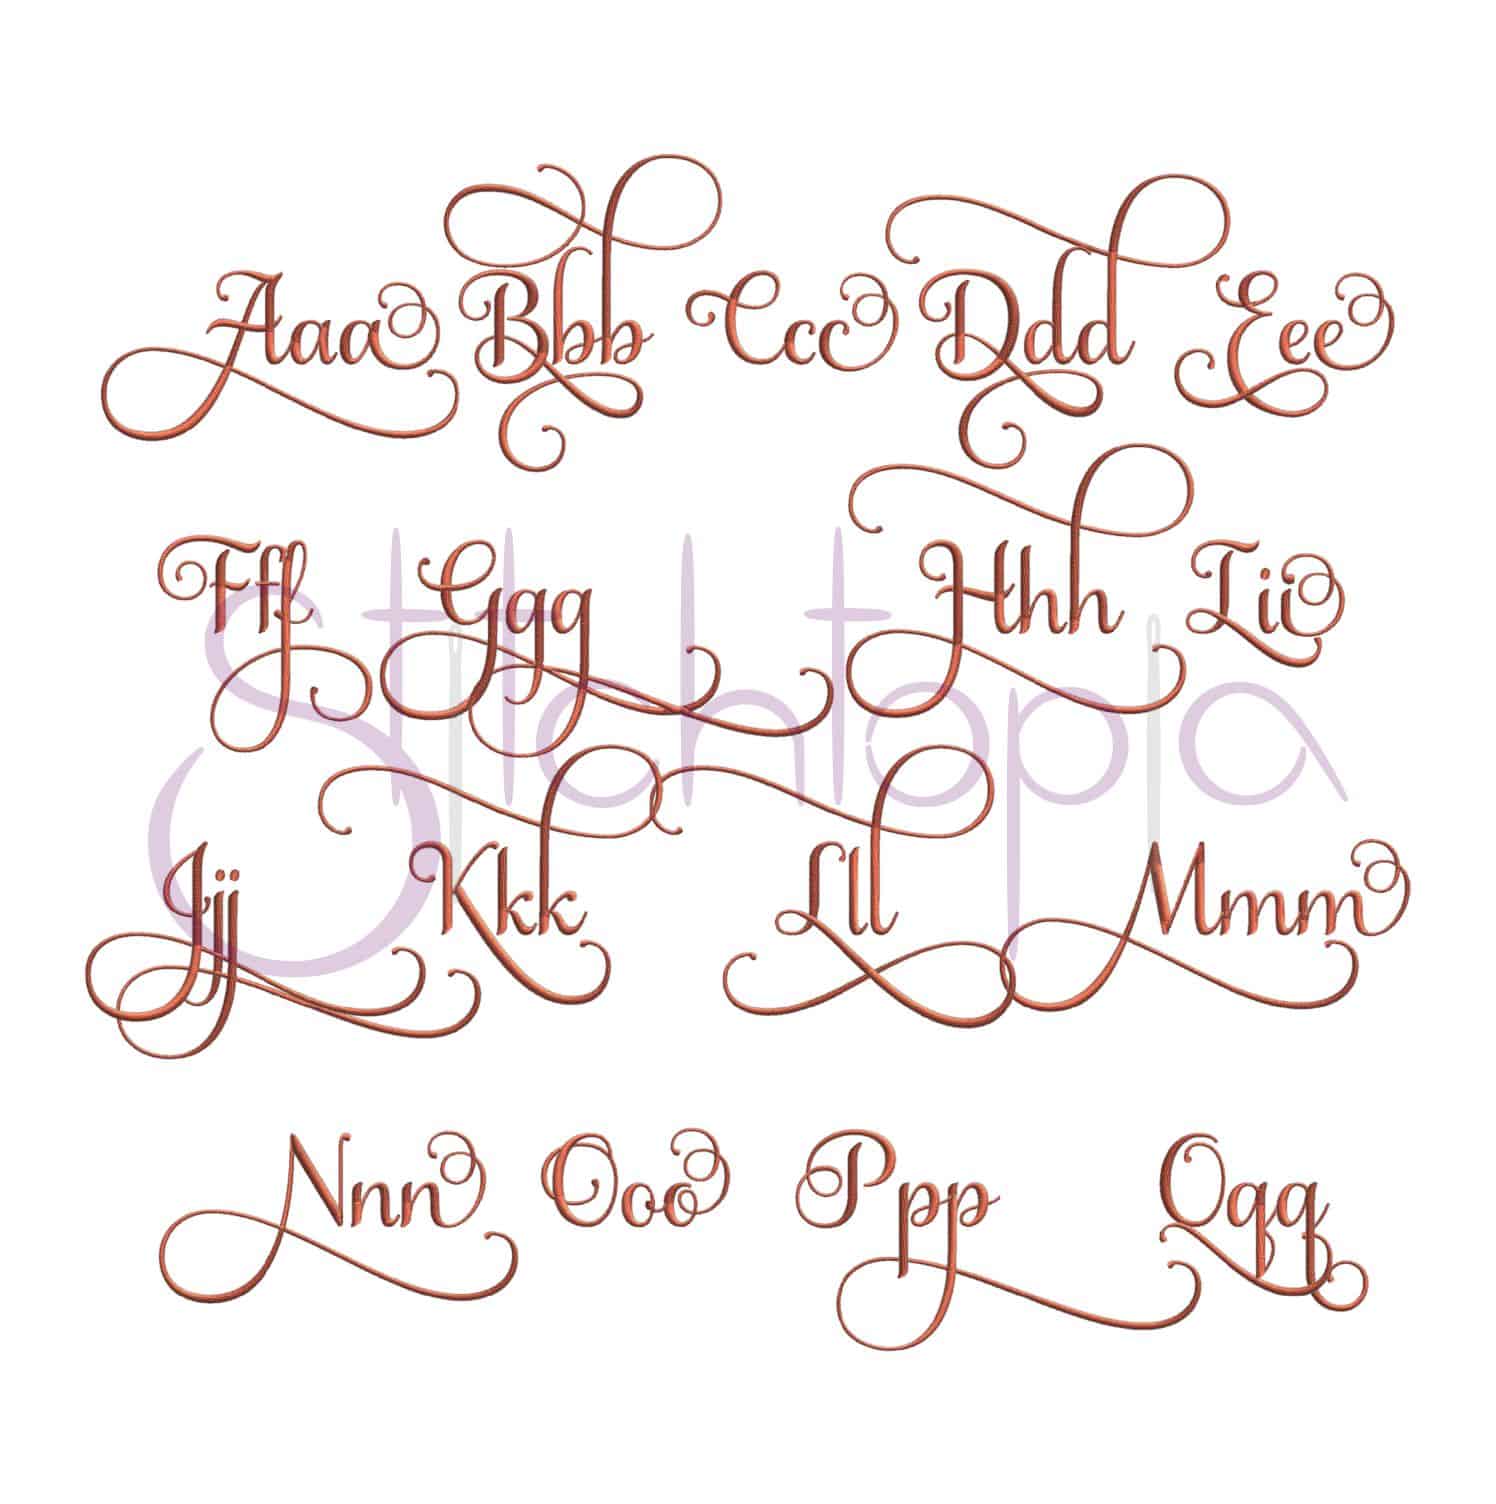 Grace Embroidery Font #1 - 2